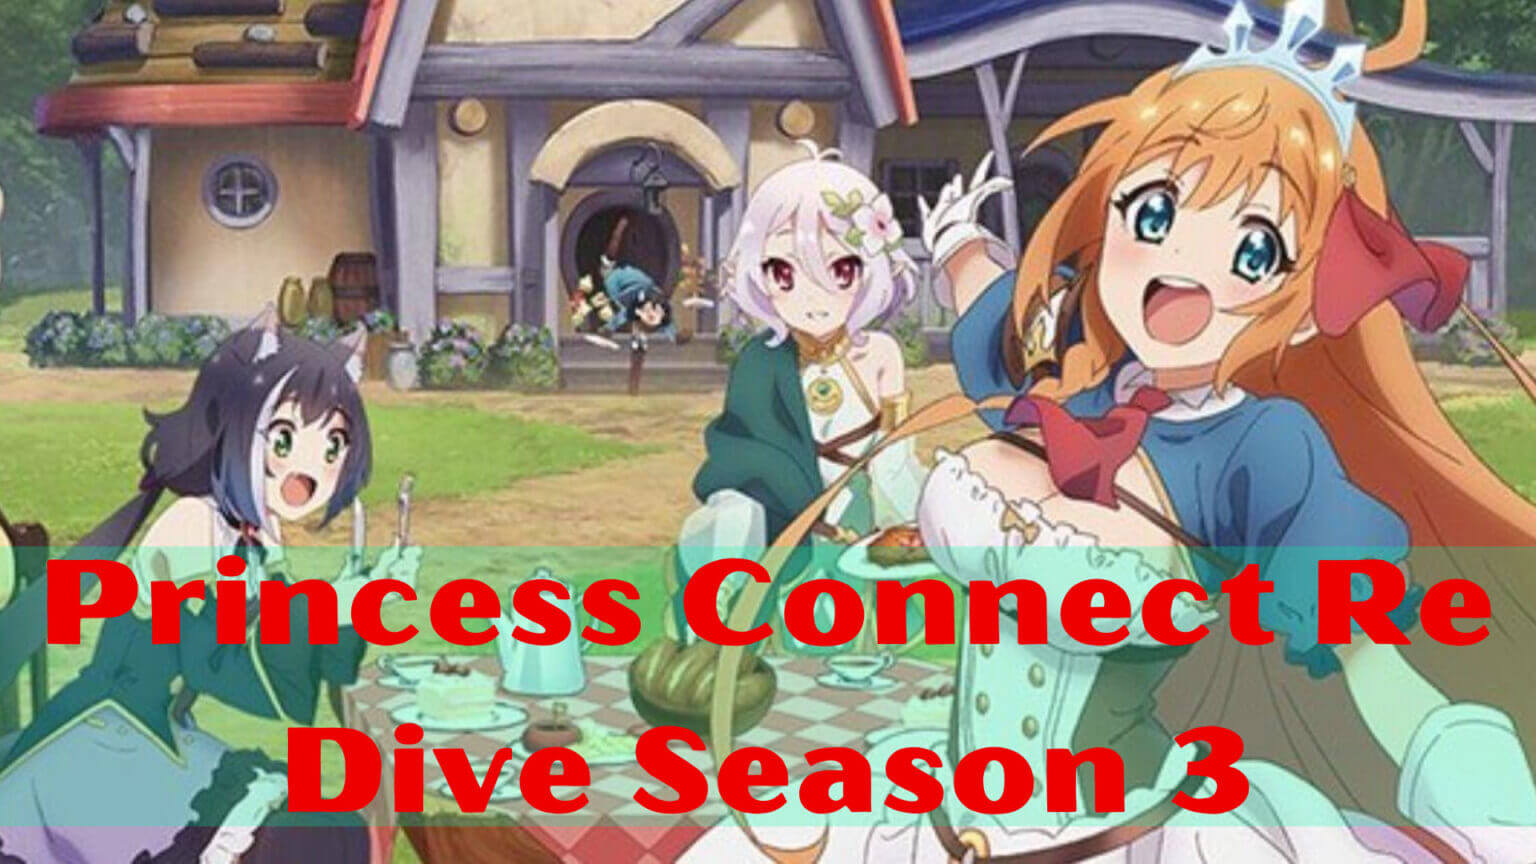 Princess Connect Re Dive Season 3 Release Date Plot Trailer And News For Anime Series Amazfeed 2484